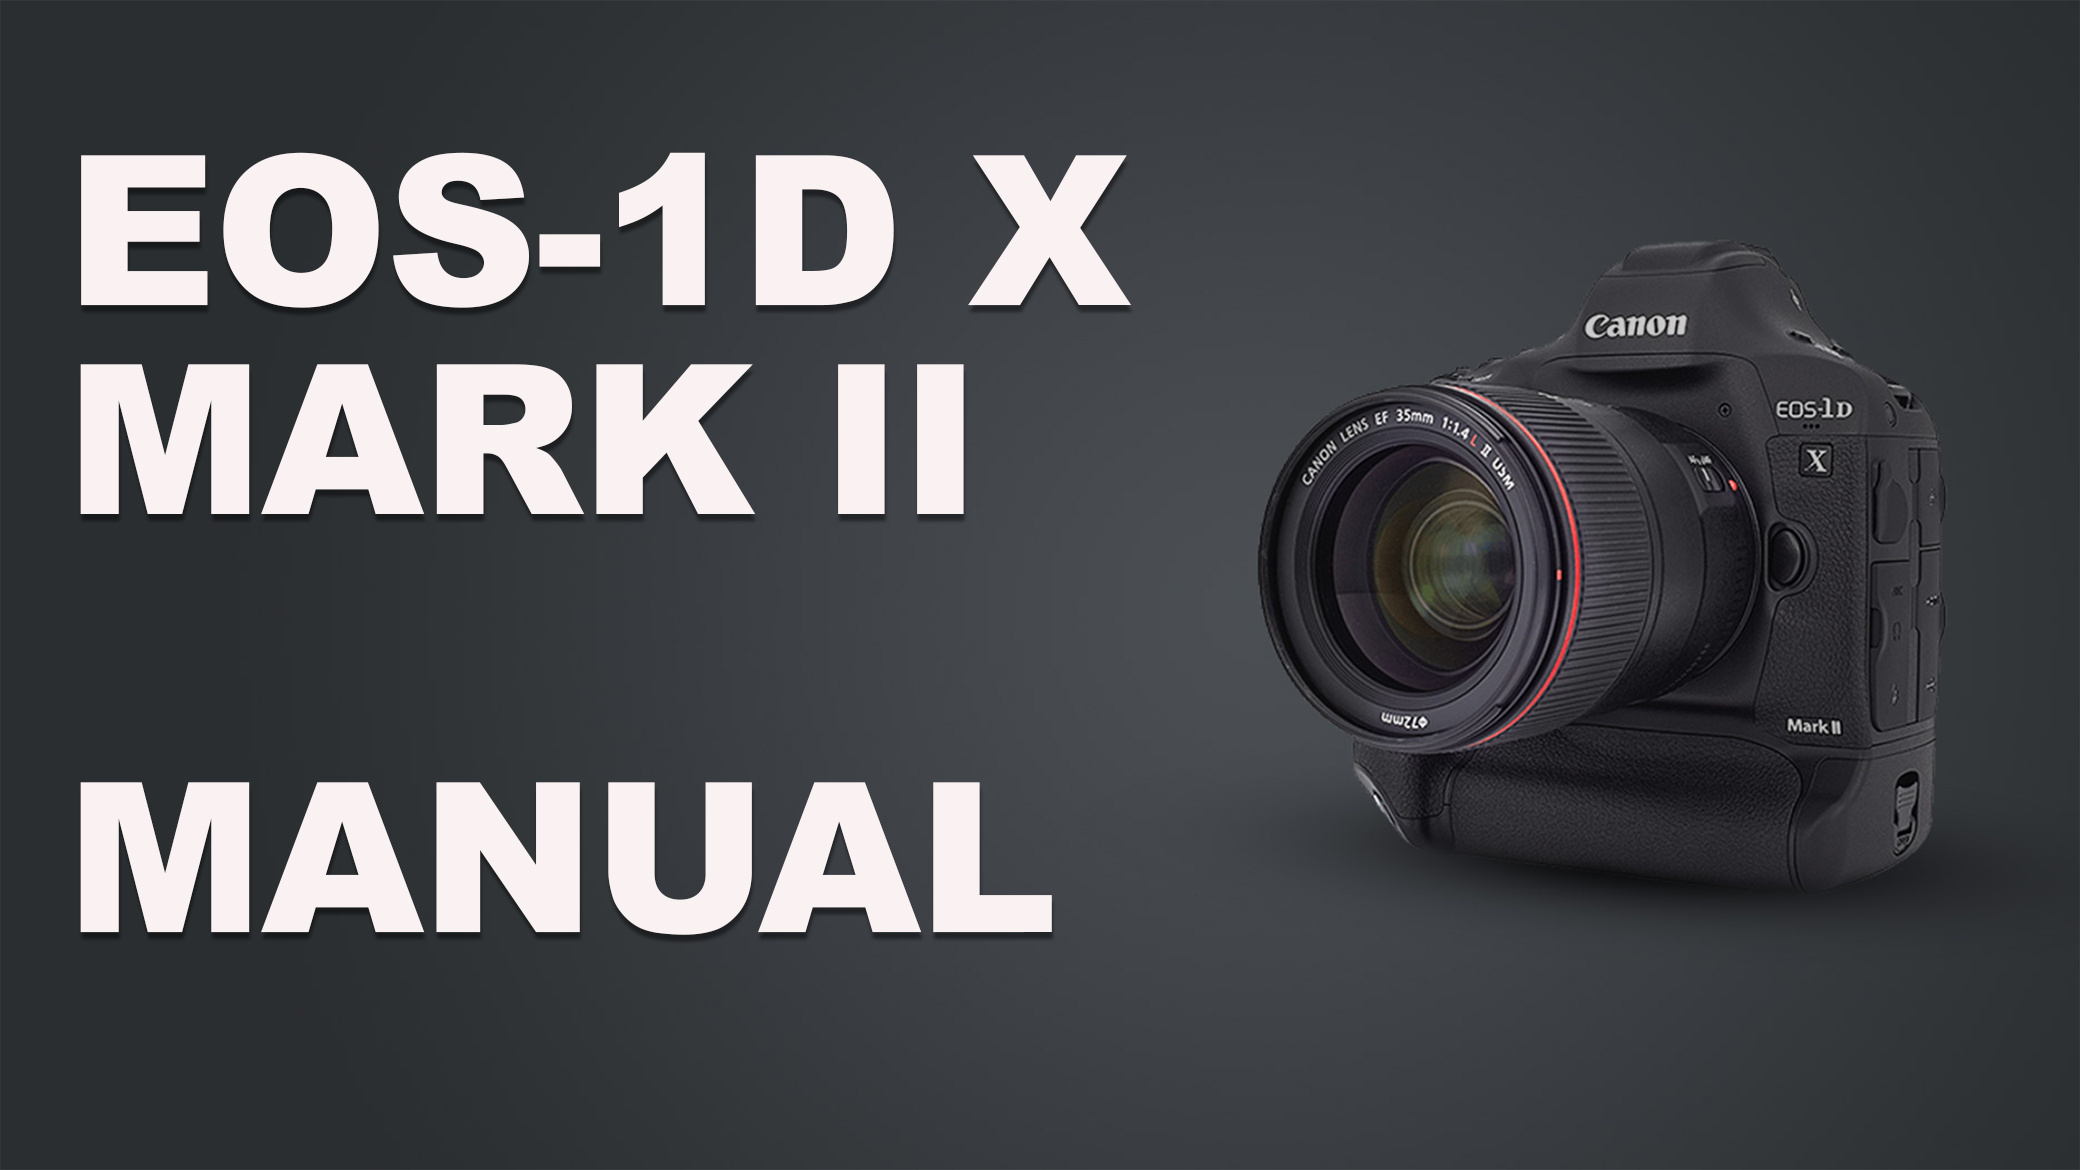 Manual available for EOS-1D X Mark II